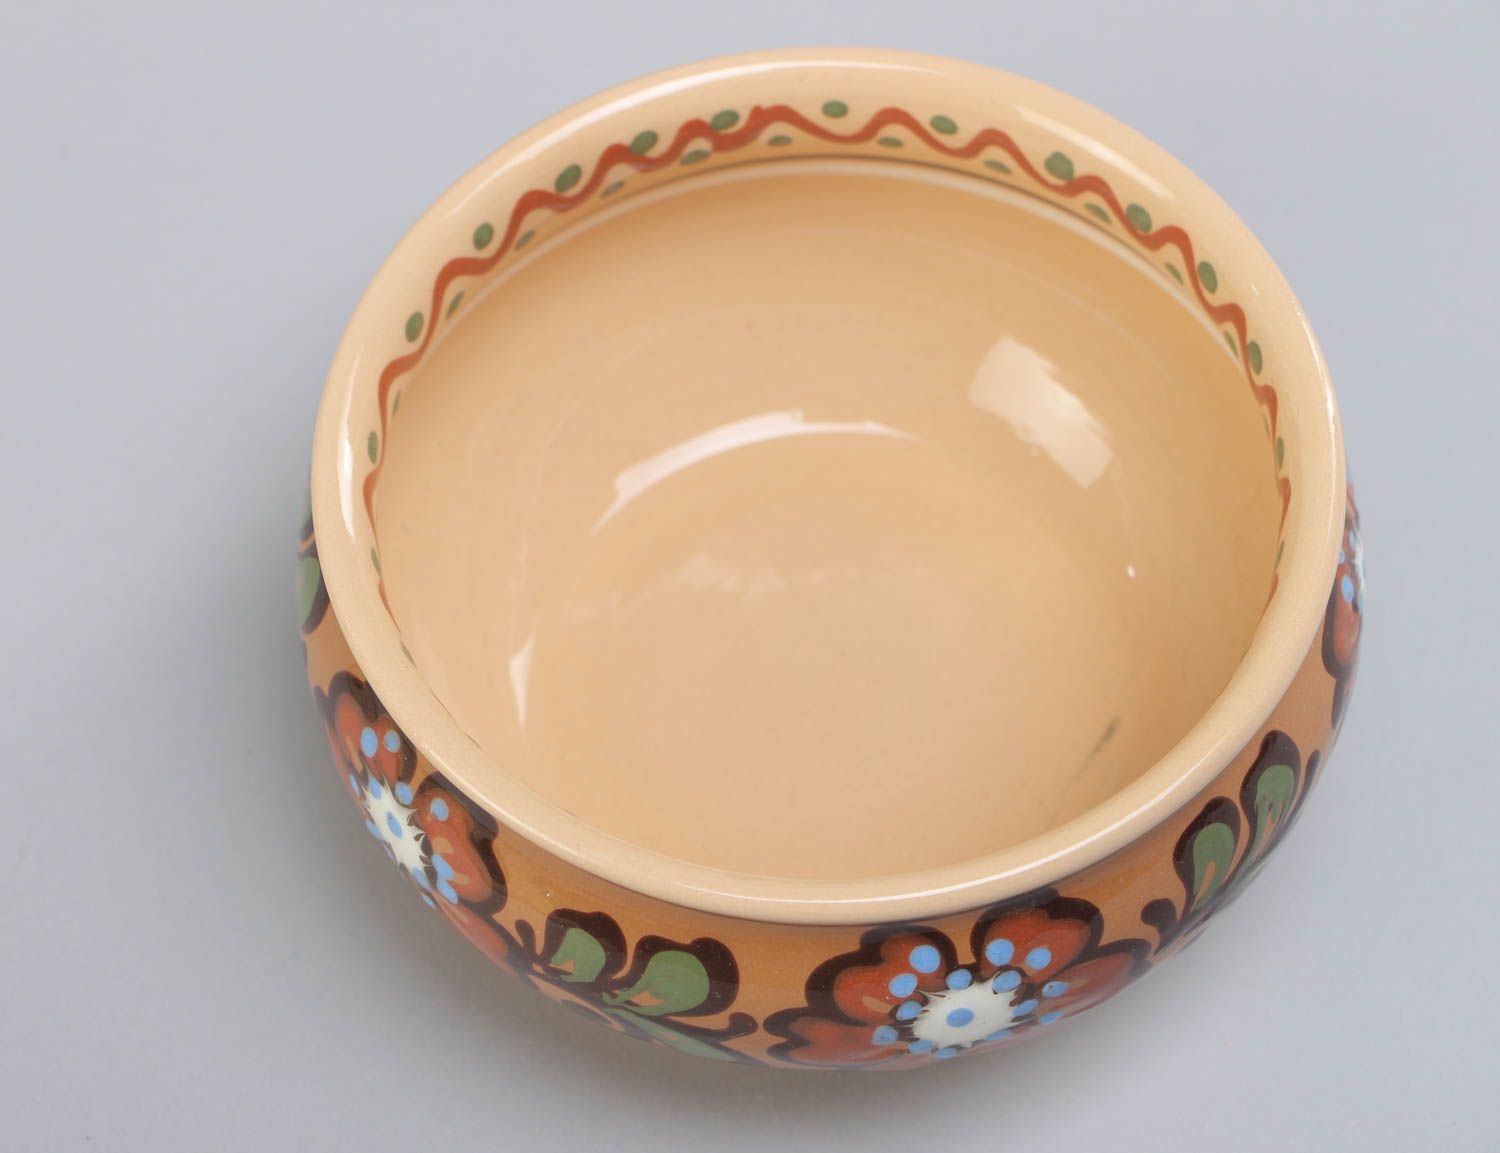 Homemade decorative ceramic deep bowl painted with colorful glaze 300 ml photo 3